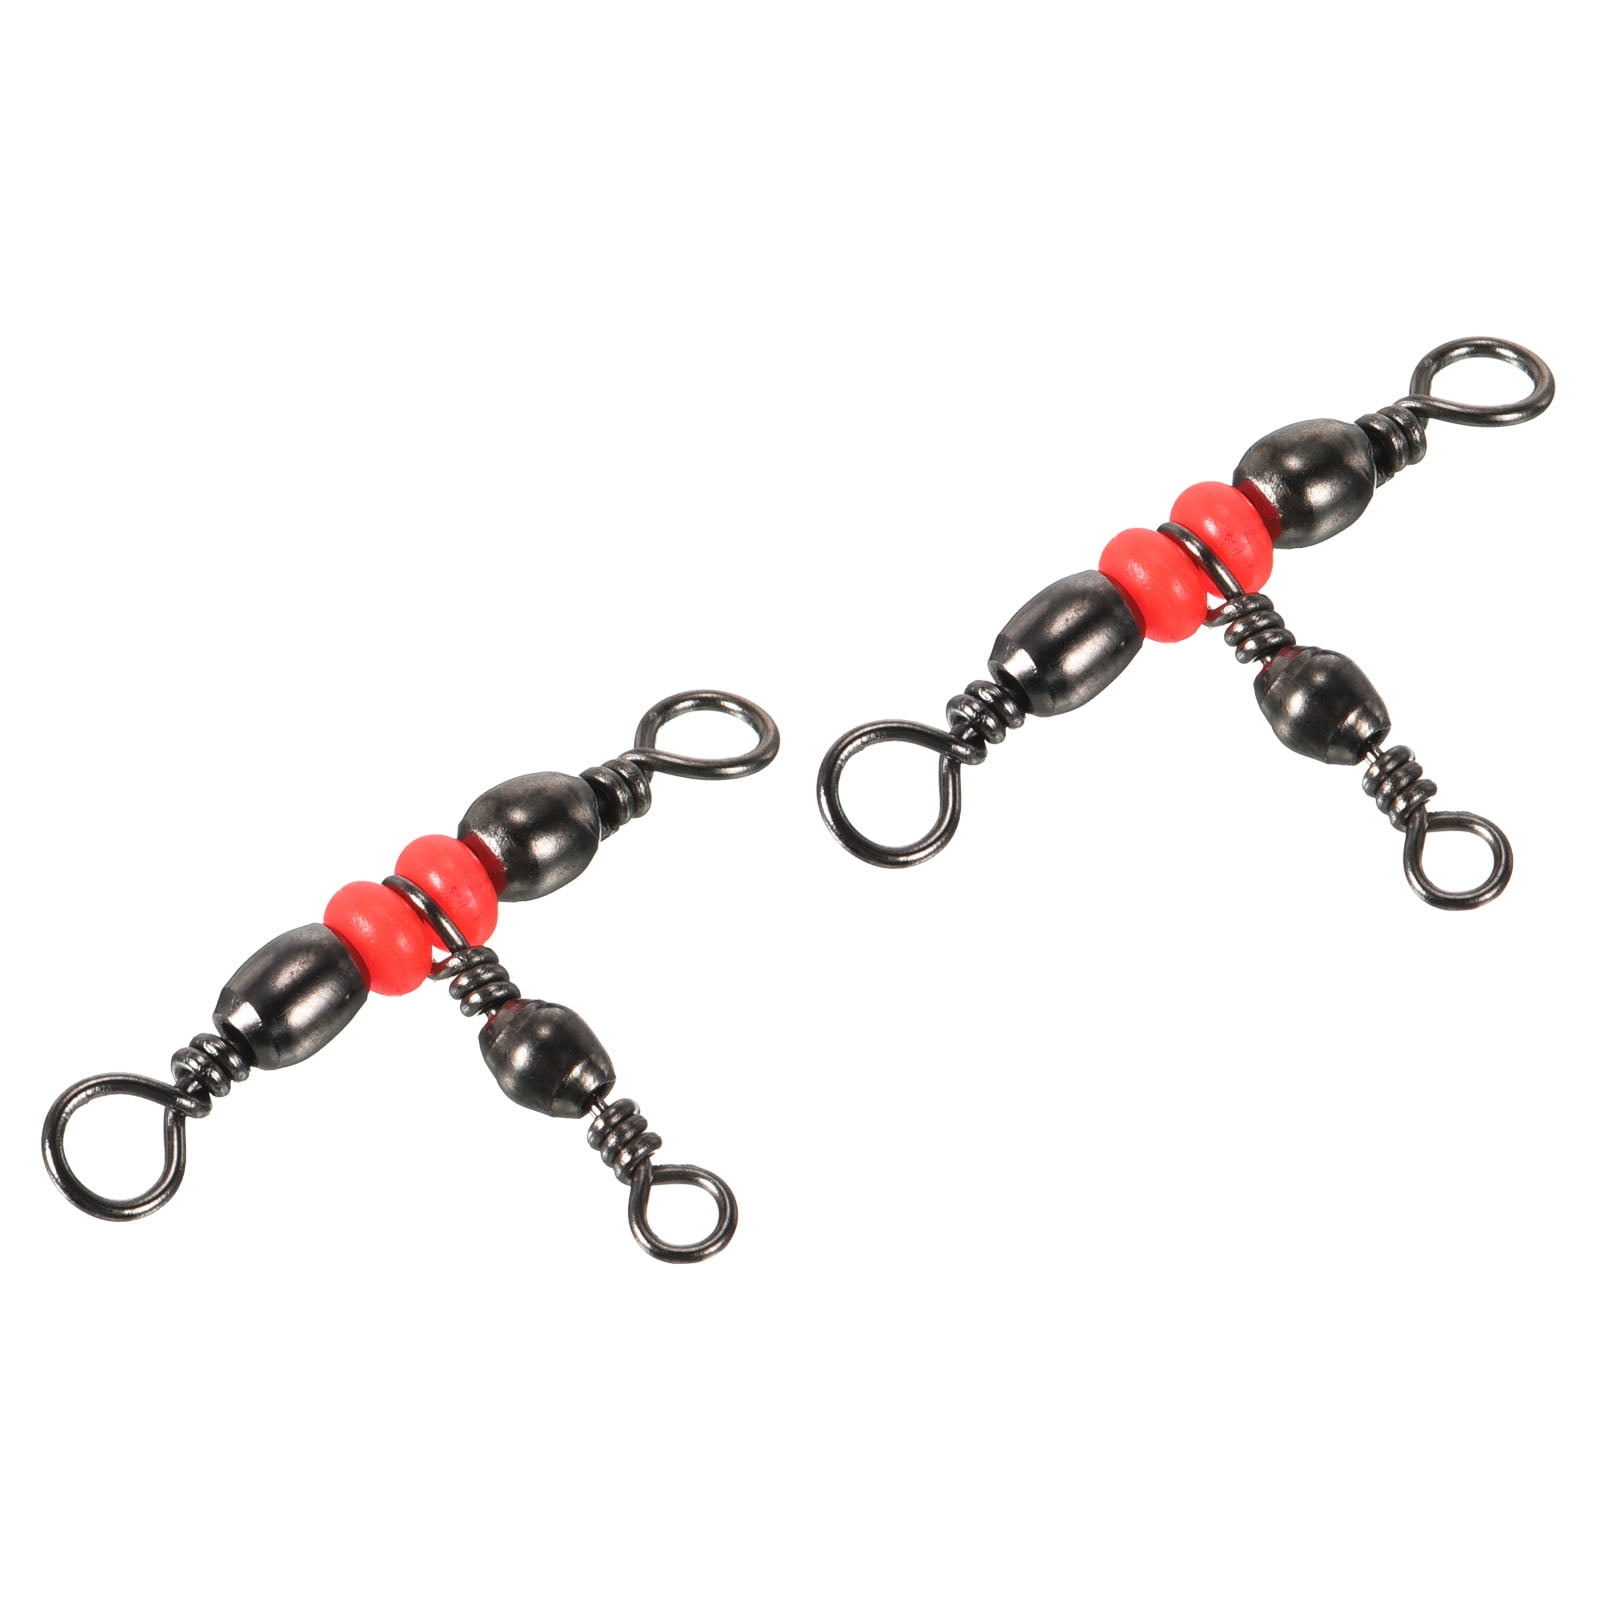 3 Way Swivel, 99lb Stainless Steel T-Turn Barrel Terminal Tackle, Black 60  Pack 